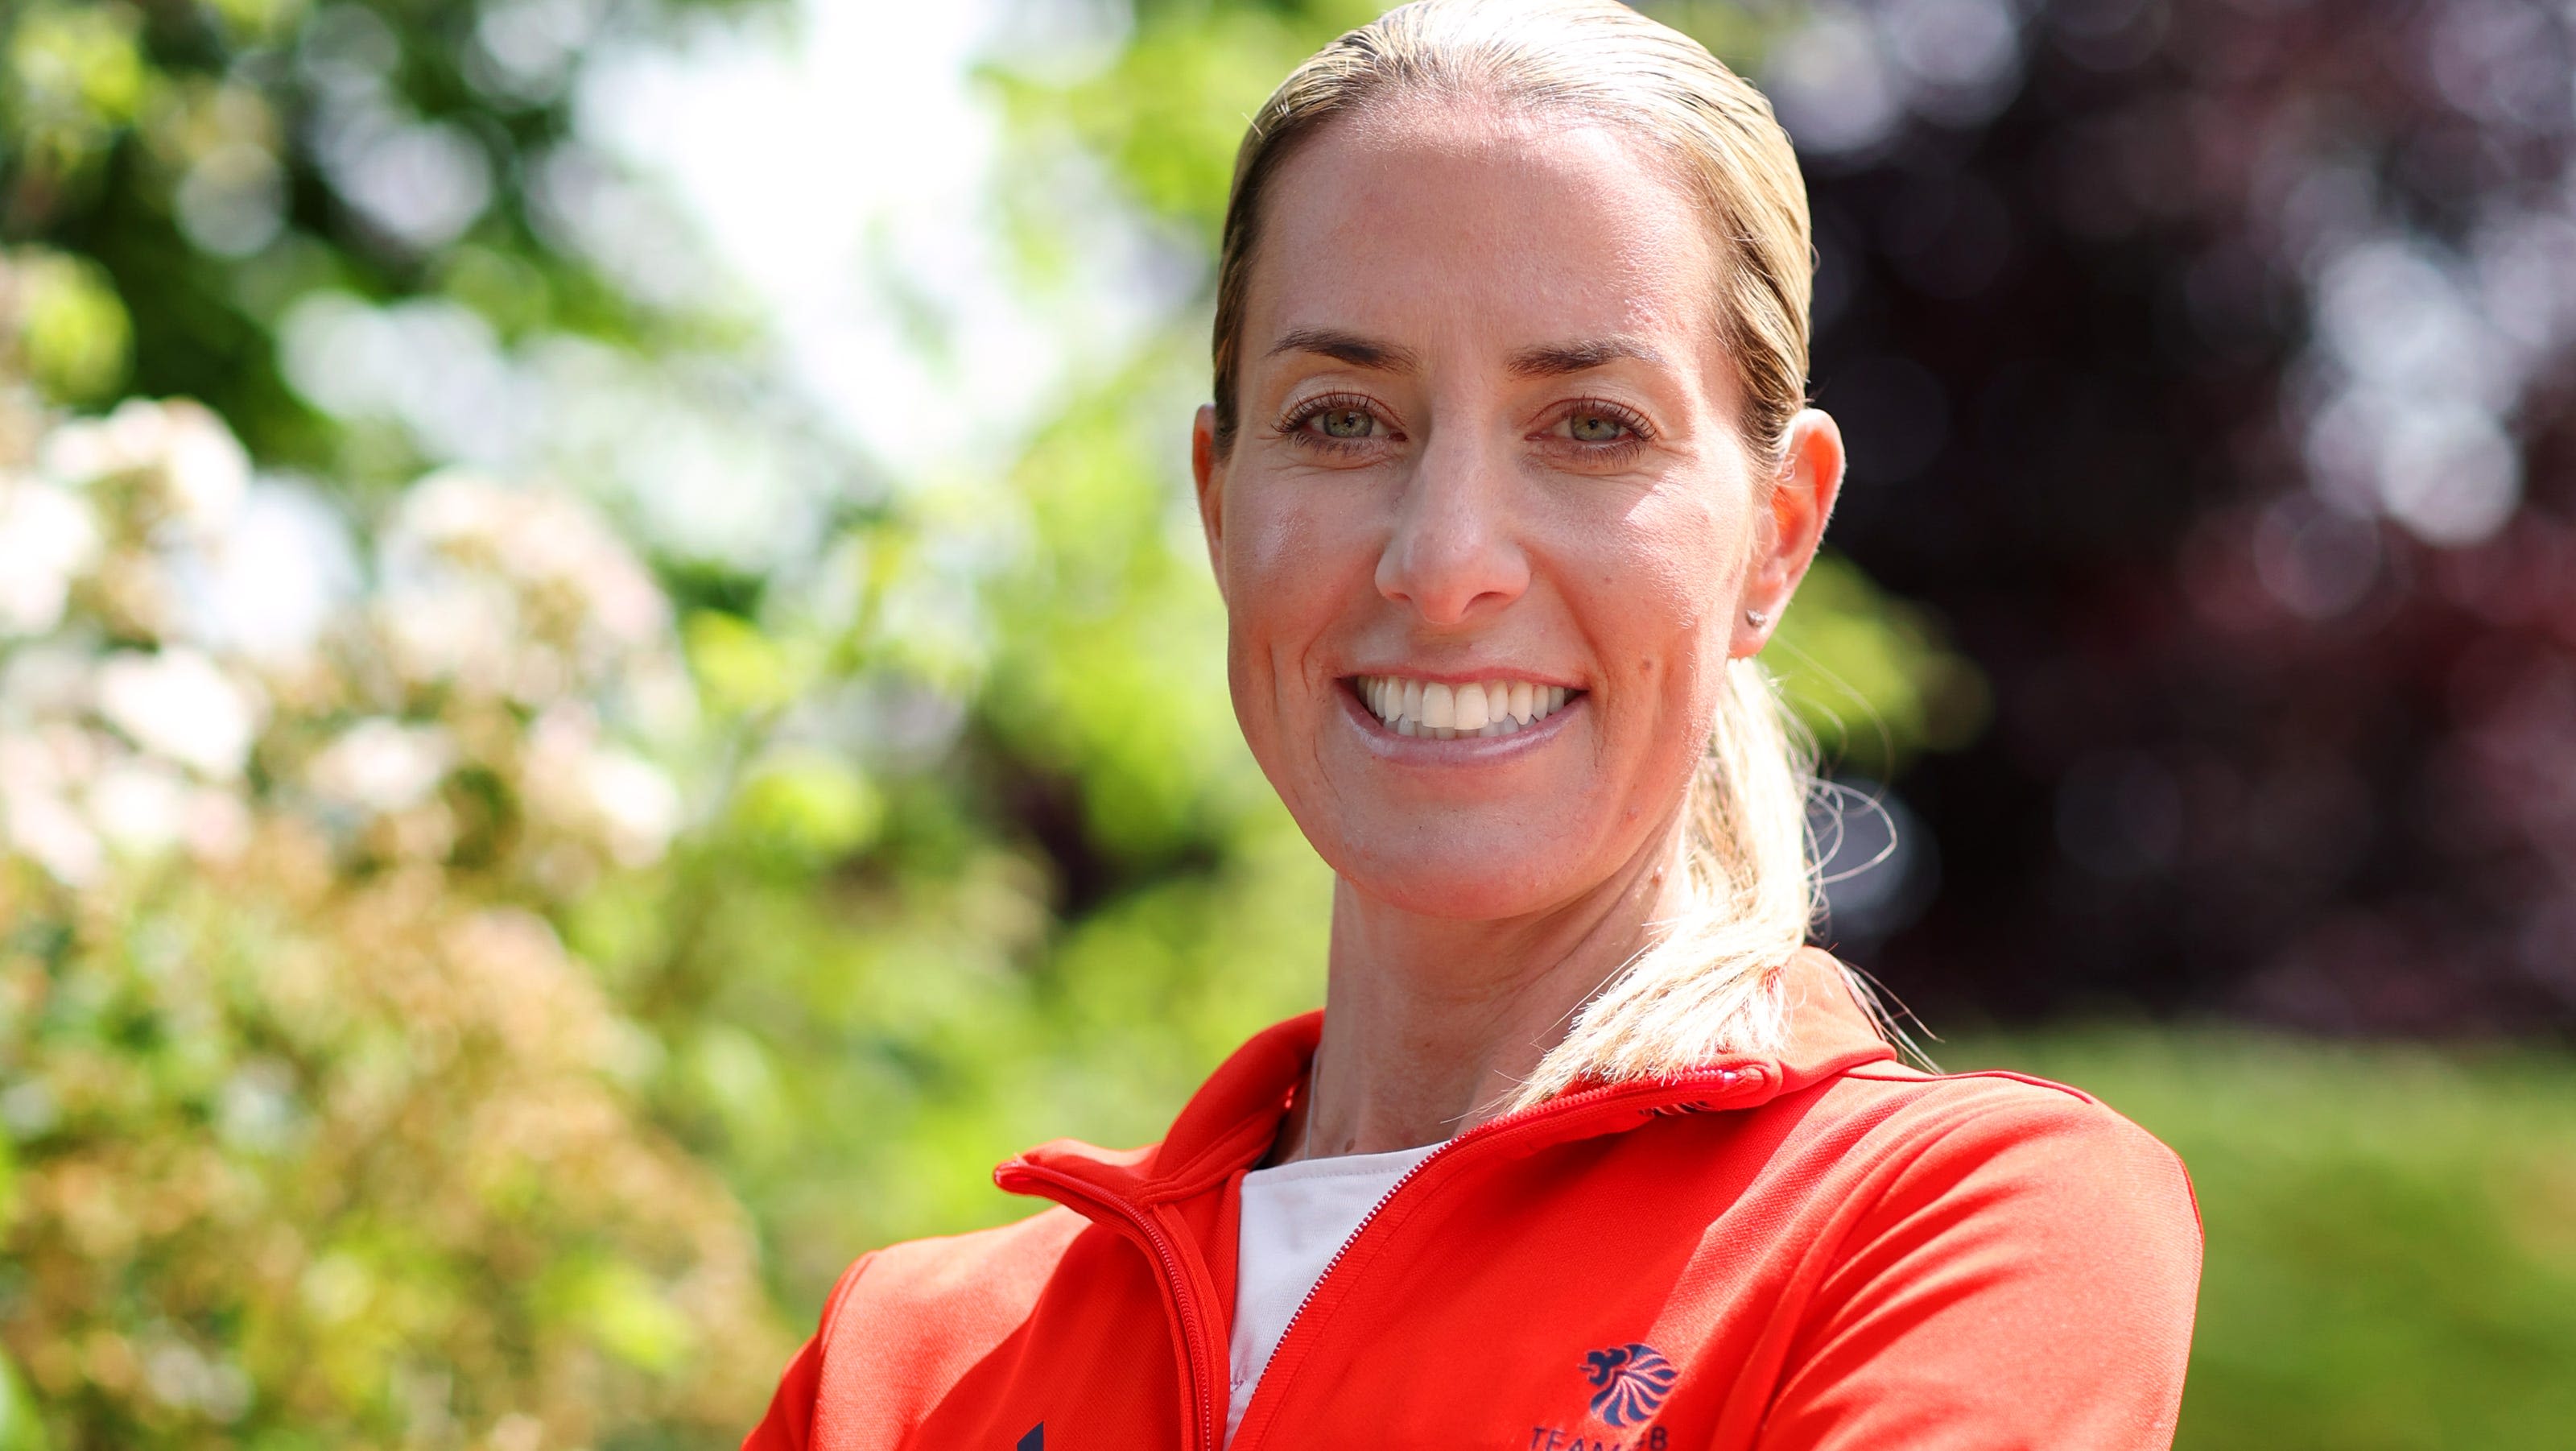 Whistleblower tied to Charlotte Dujardin video 'wants to save dressage'